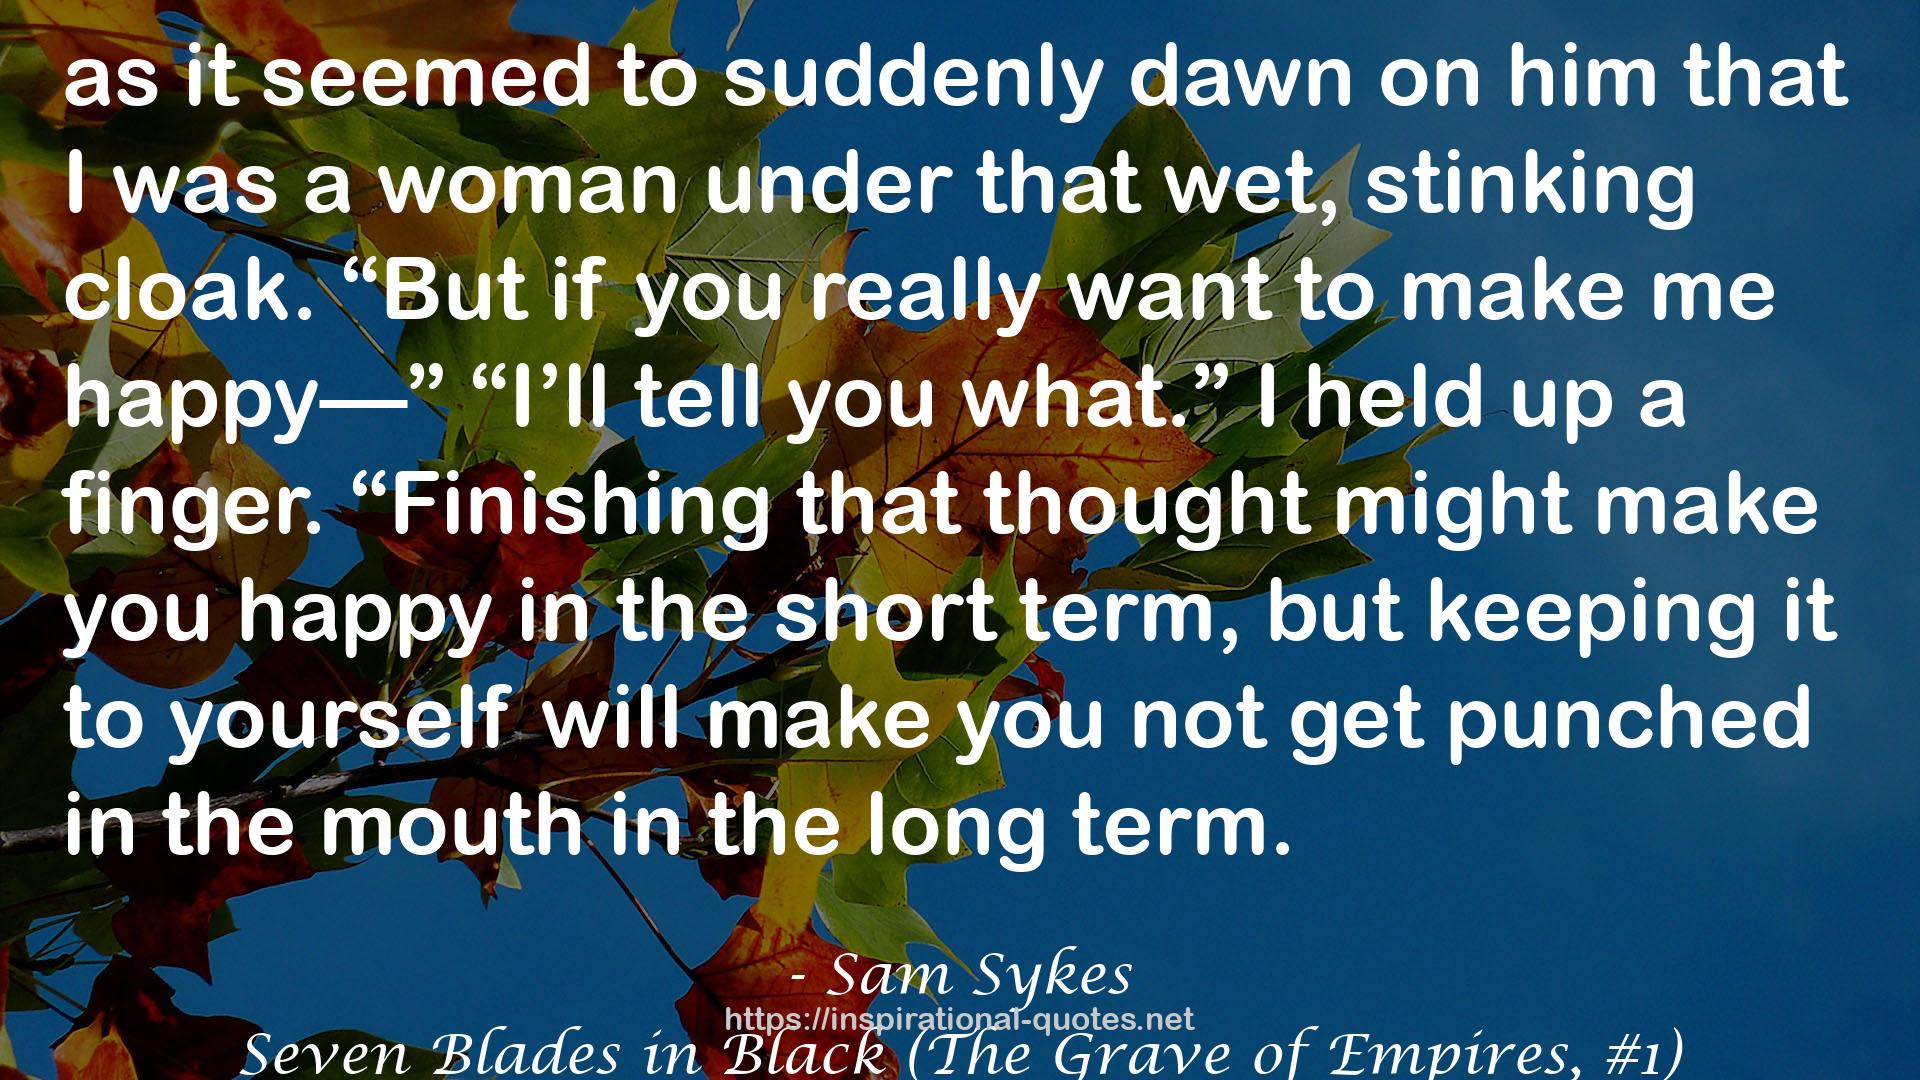 Seven Blades in Black (The Grave of Empires, #1) QUOTES